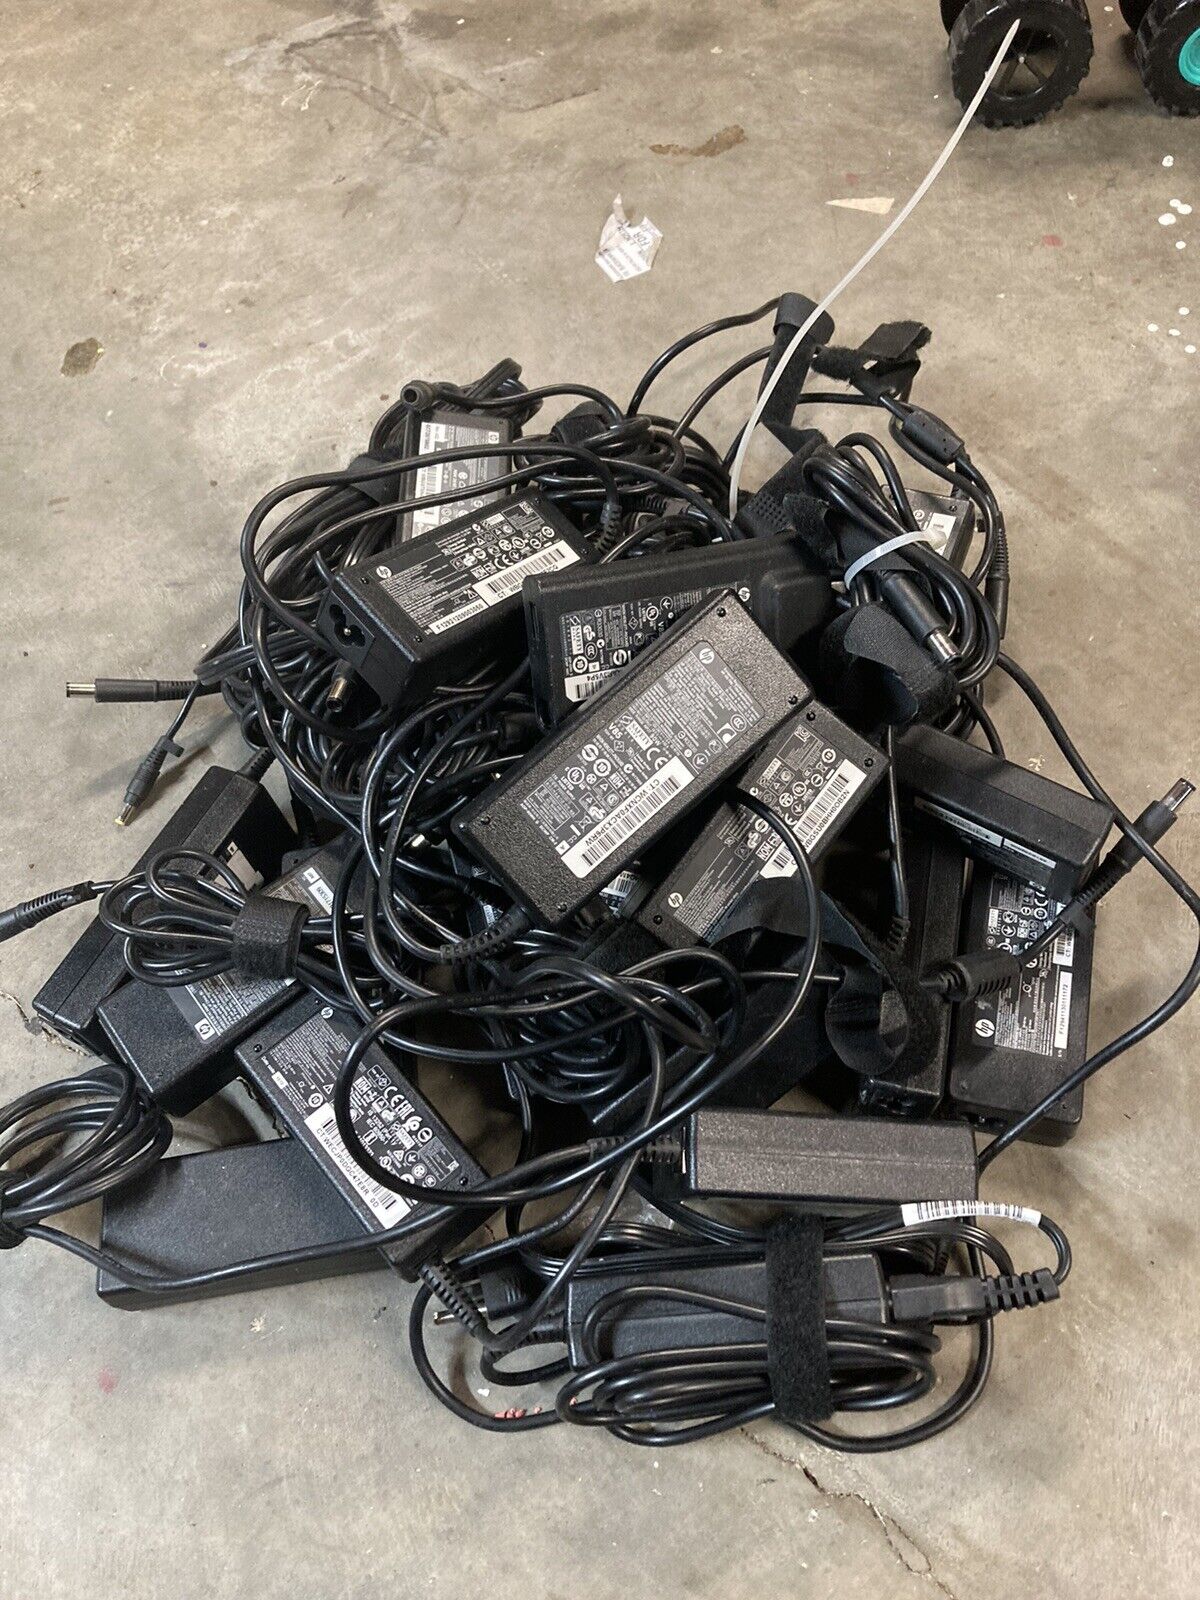 Lot of 22 Miscellaneous  Genuine  HP  Power Adapters